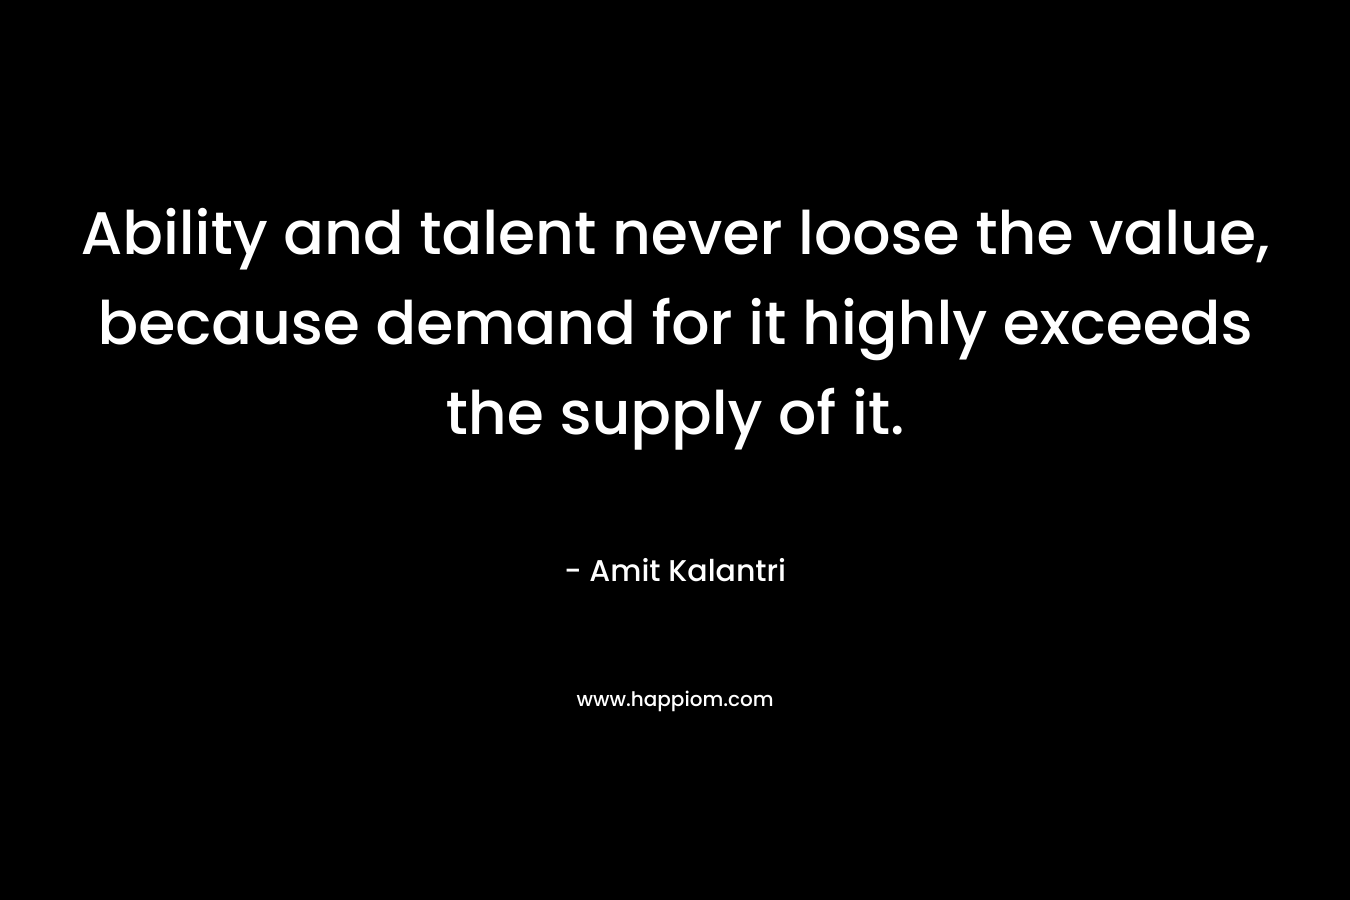 Ability and talent never loose the value, because demand for it highly exceeds the supply of it.